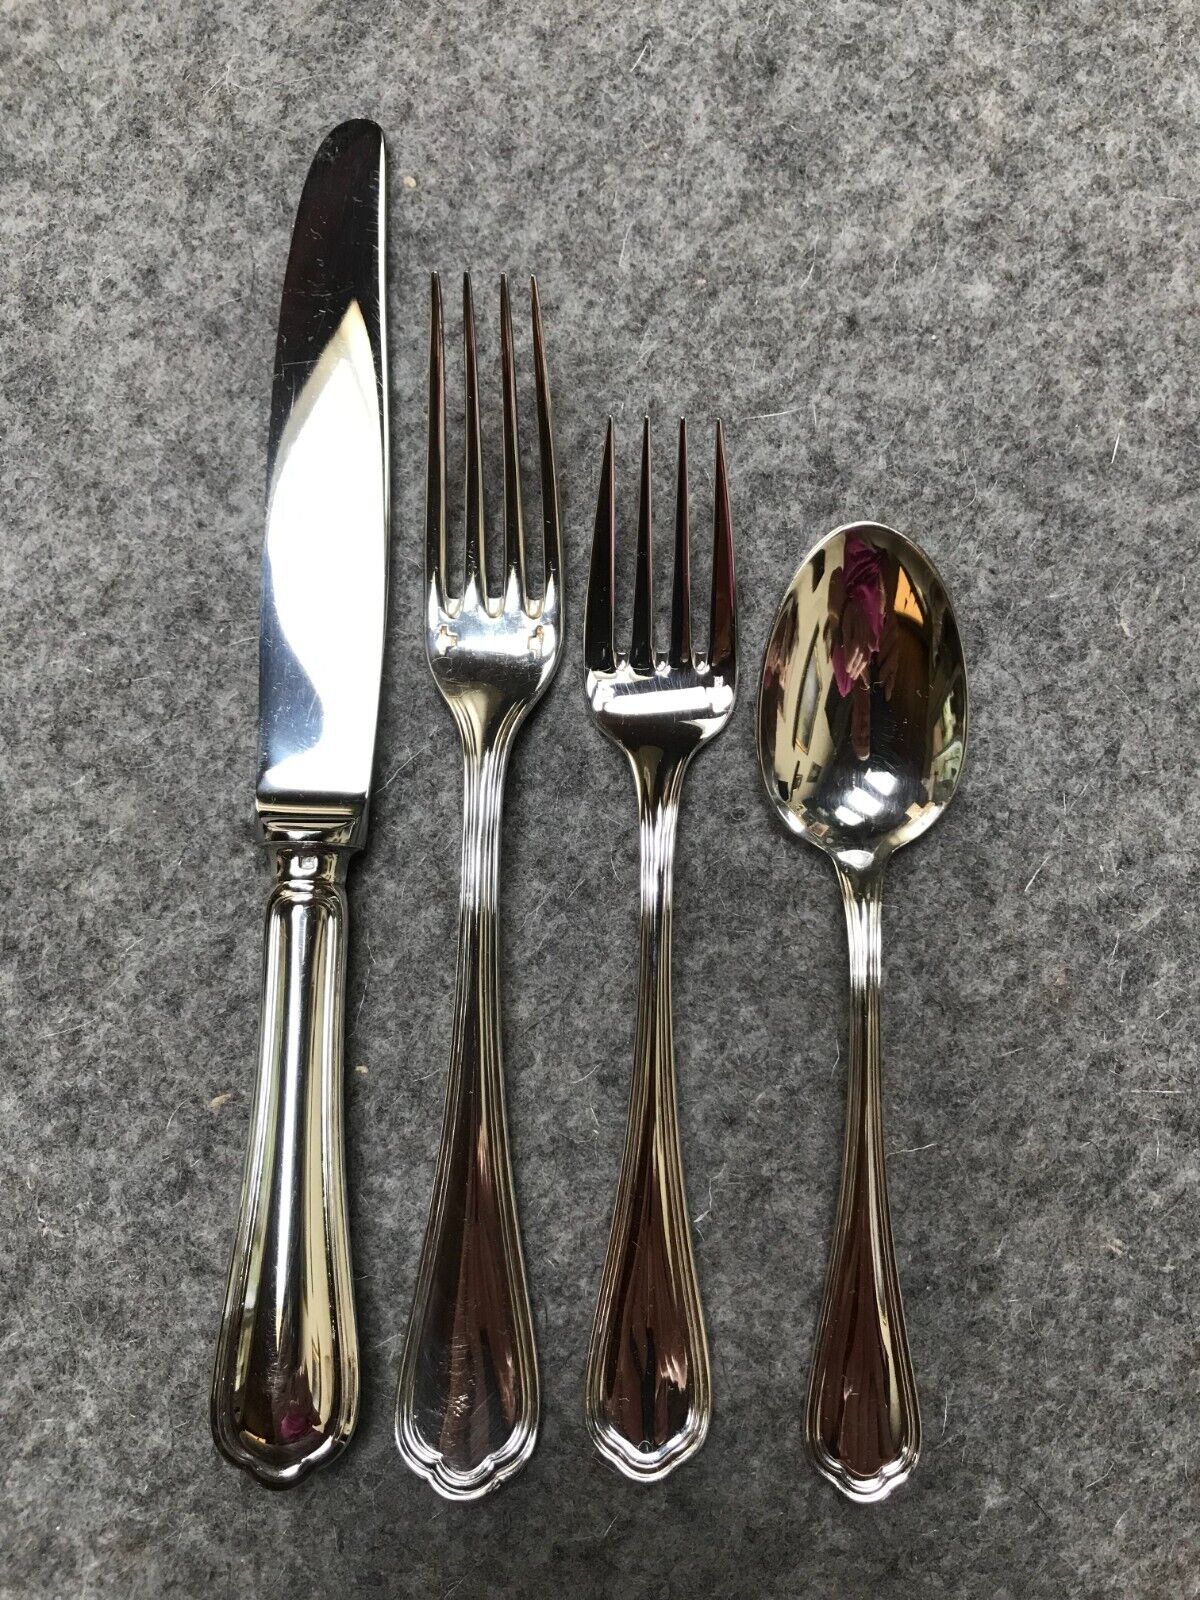 Exc Cond Christofle France Spatours Silverplate 4 Piece Place Setting